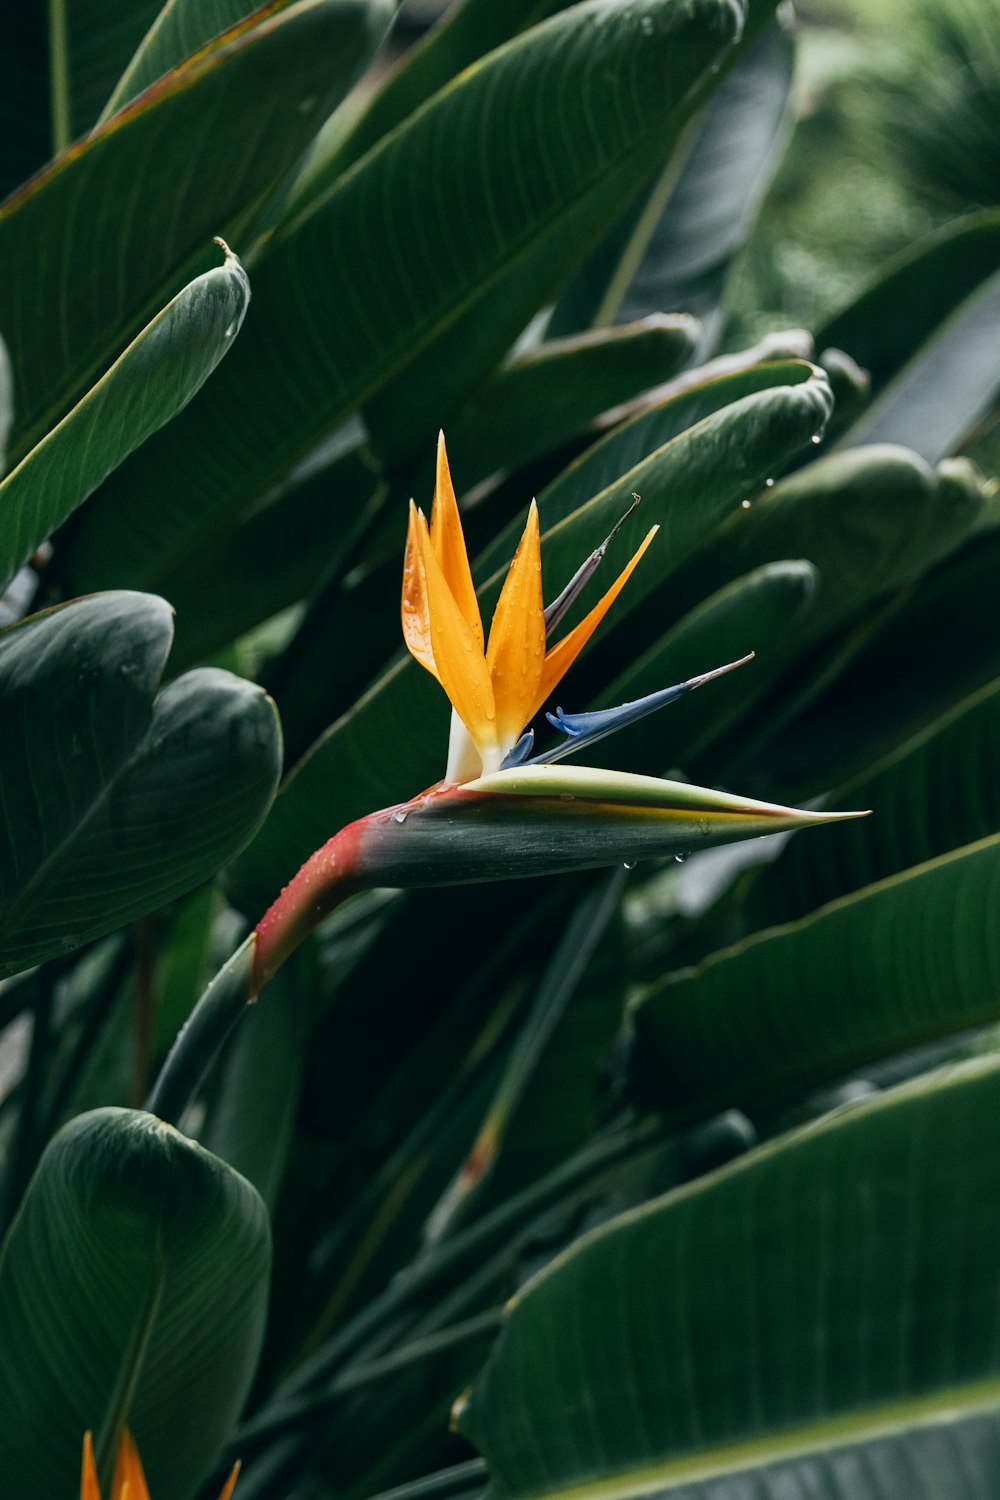 yellow and blue birds of paradise flower in bloom during daytime